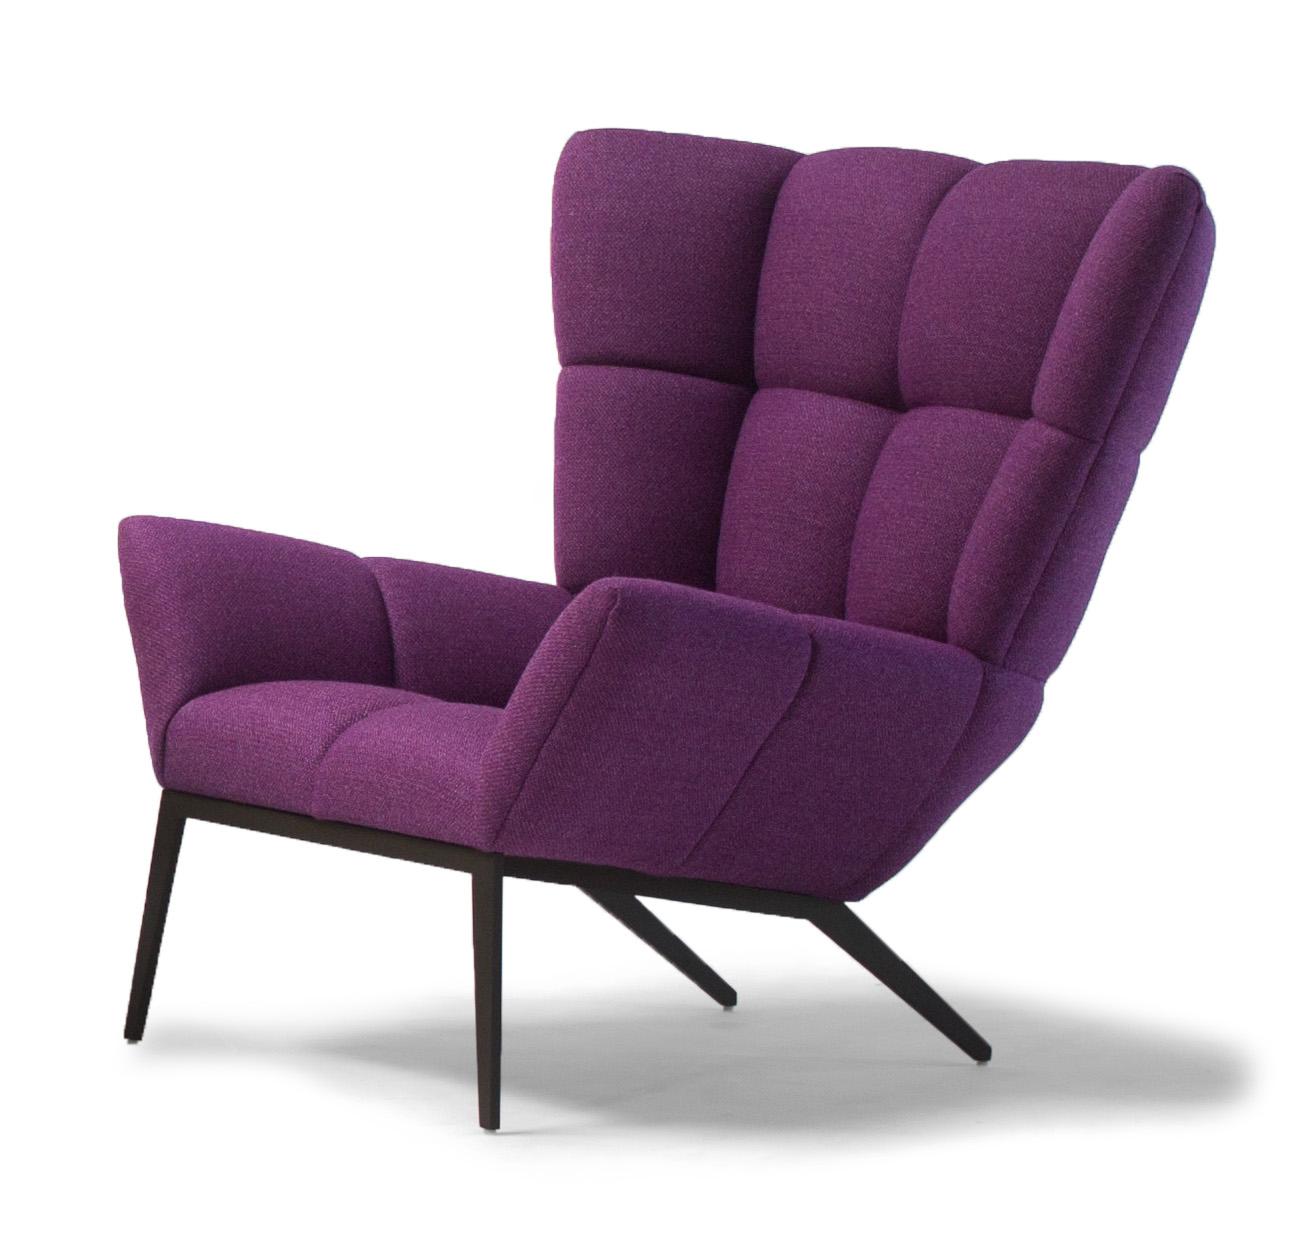 Mid-Century Modern Vioski New Century Modern Tufted Tuulla Lounge Chair in Orchid Purple For Sale